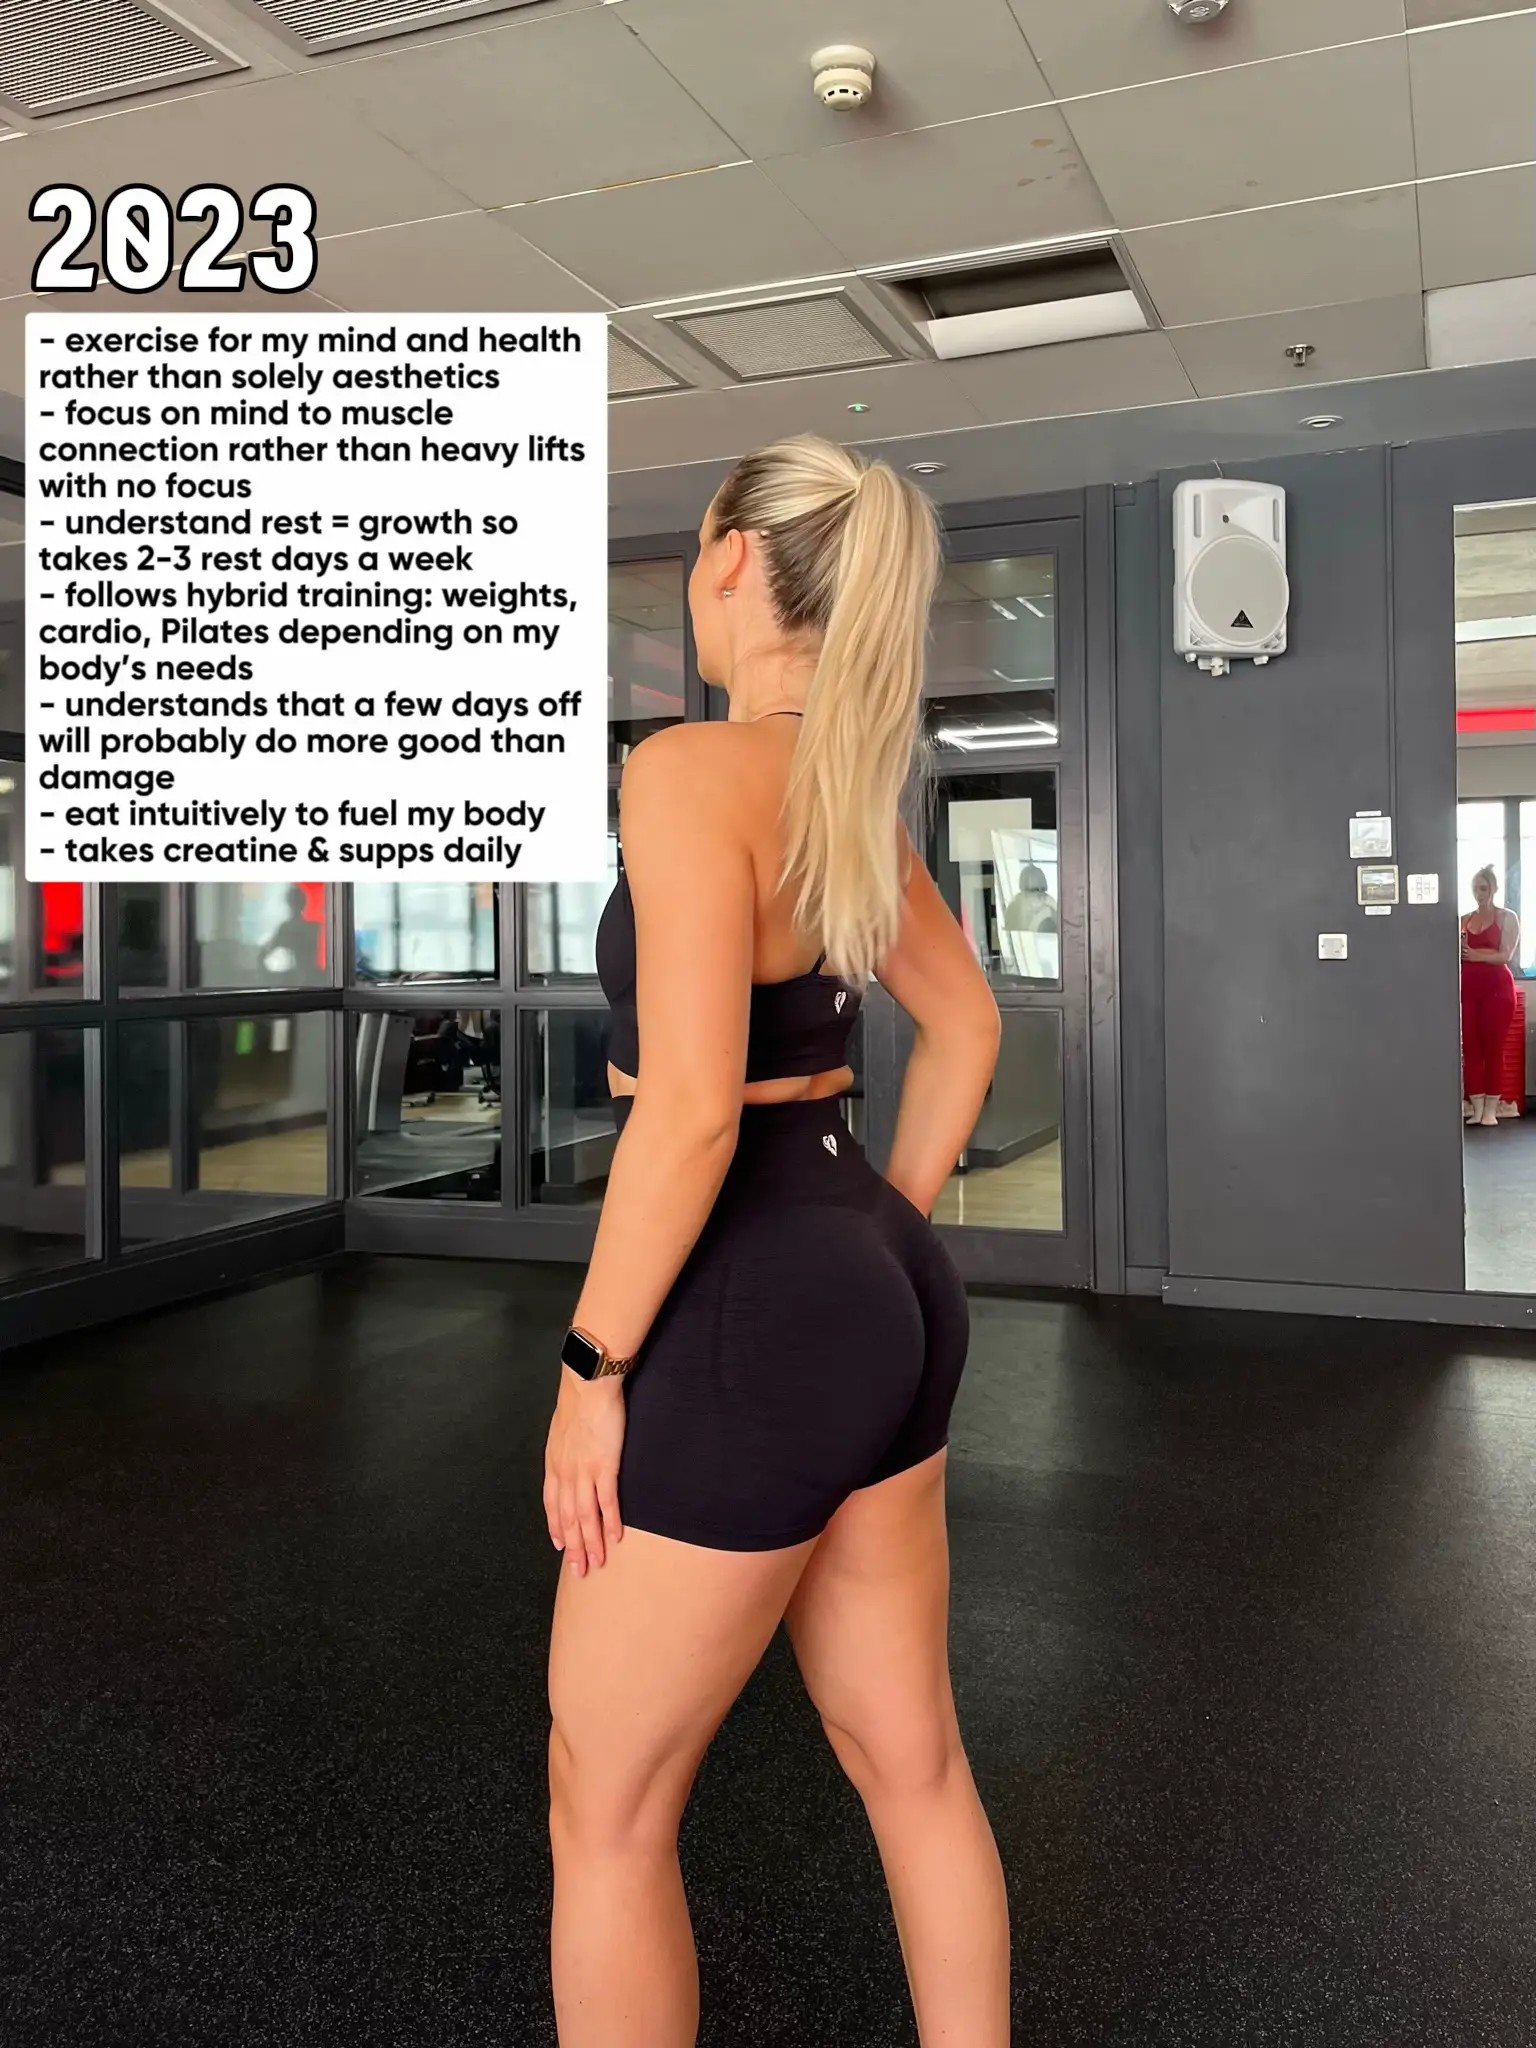 Lower body, glutes focused workout❤️‍🔥 + mind muscle connection is im